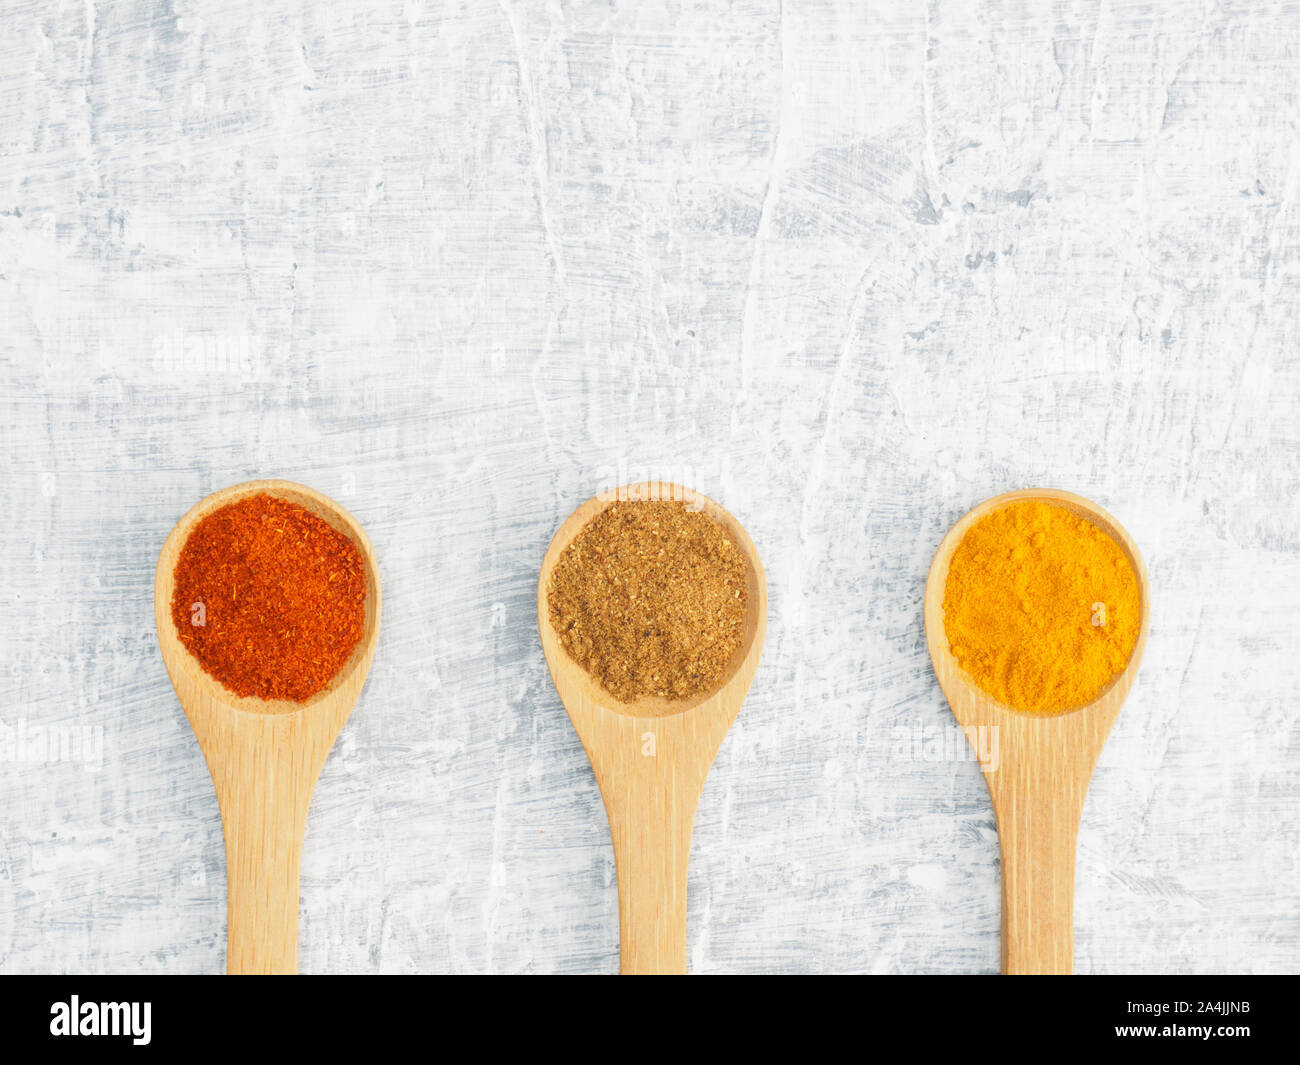 Spices help maintain good health and improve appetite, top view on white concrete background. Red chili pepper, masala, turmeric in wooden spoon. Mode Stock Photo